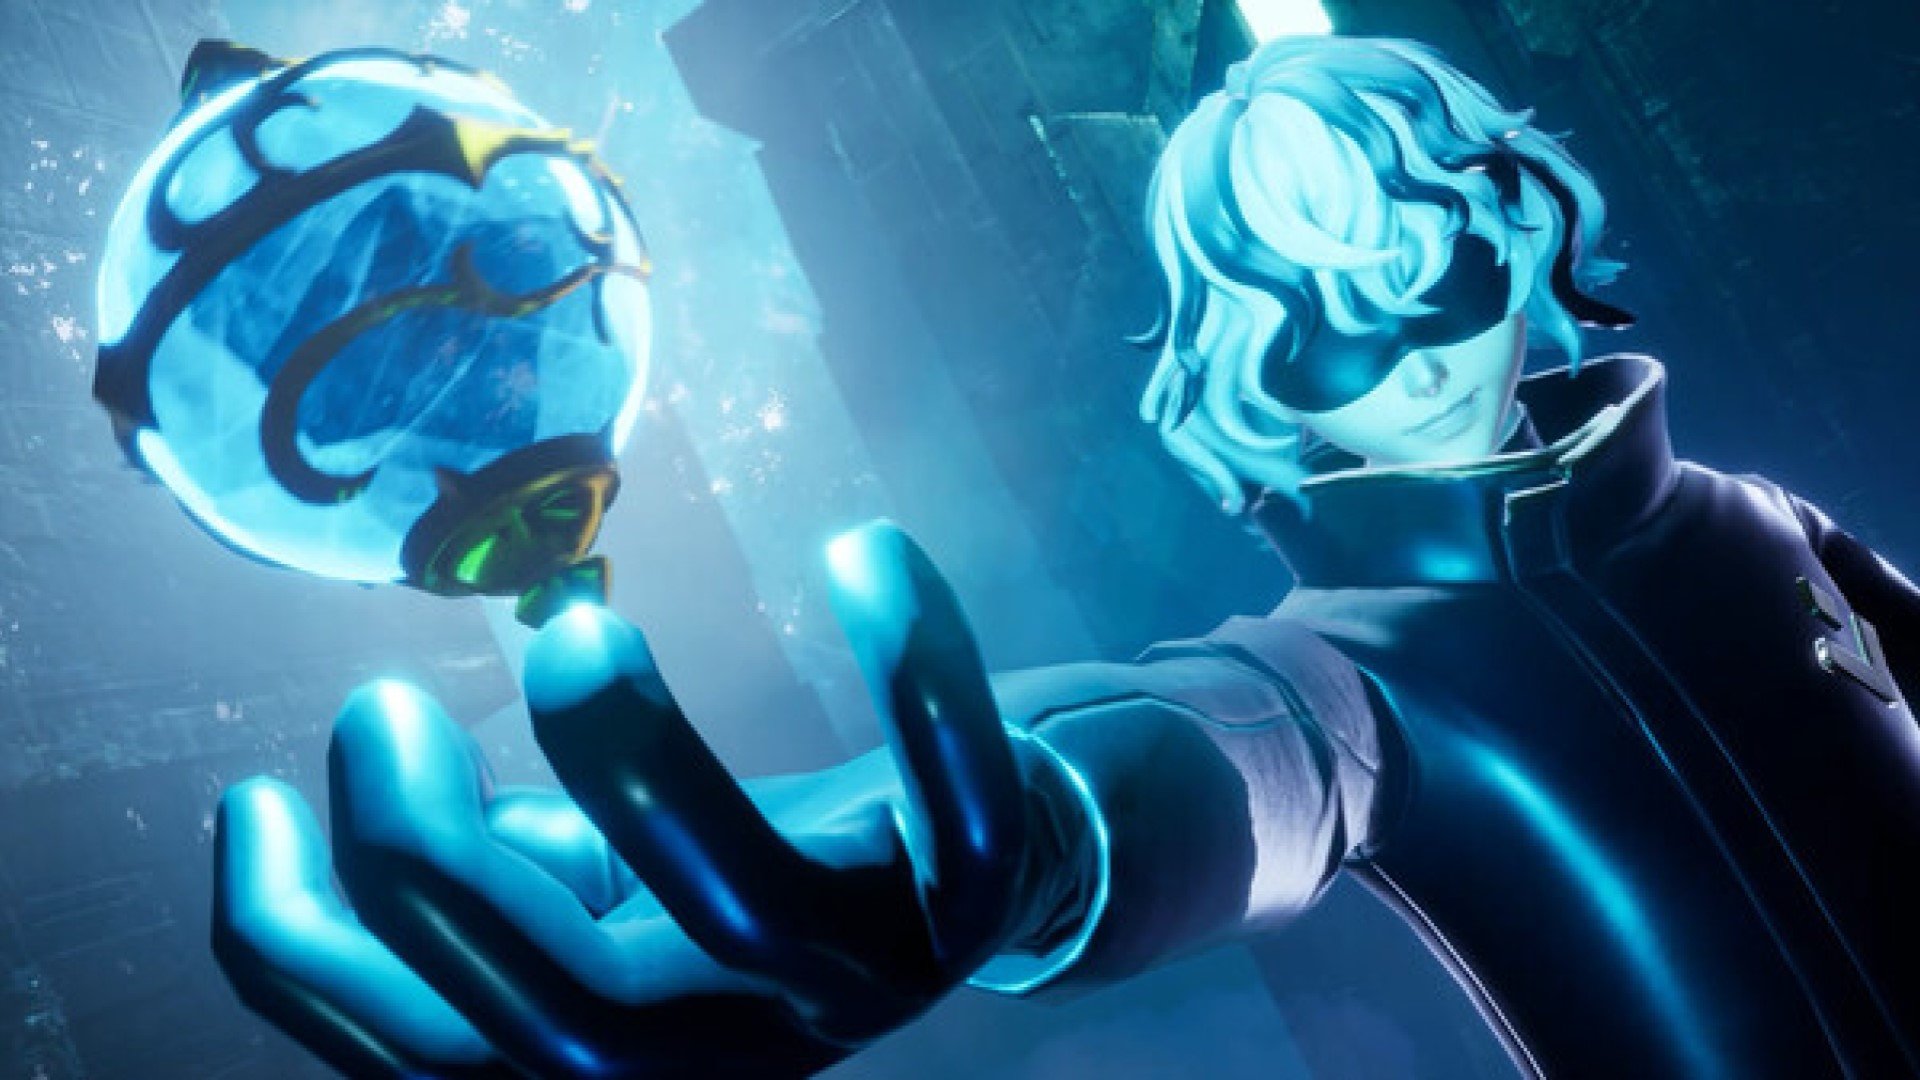 A character from the game Palworld, shown bathed in blue light, holding a Pal Sphere in their outstretched hand. The character is wearing sunglasses. In the background, dark buildings loom.